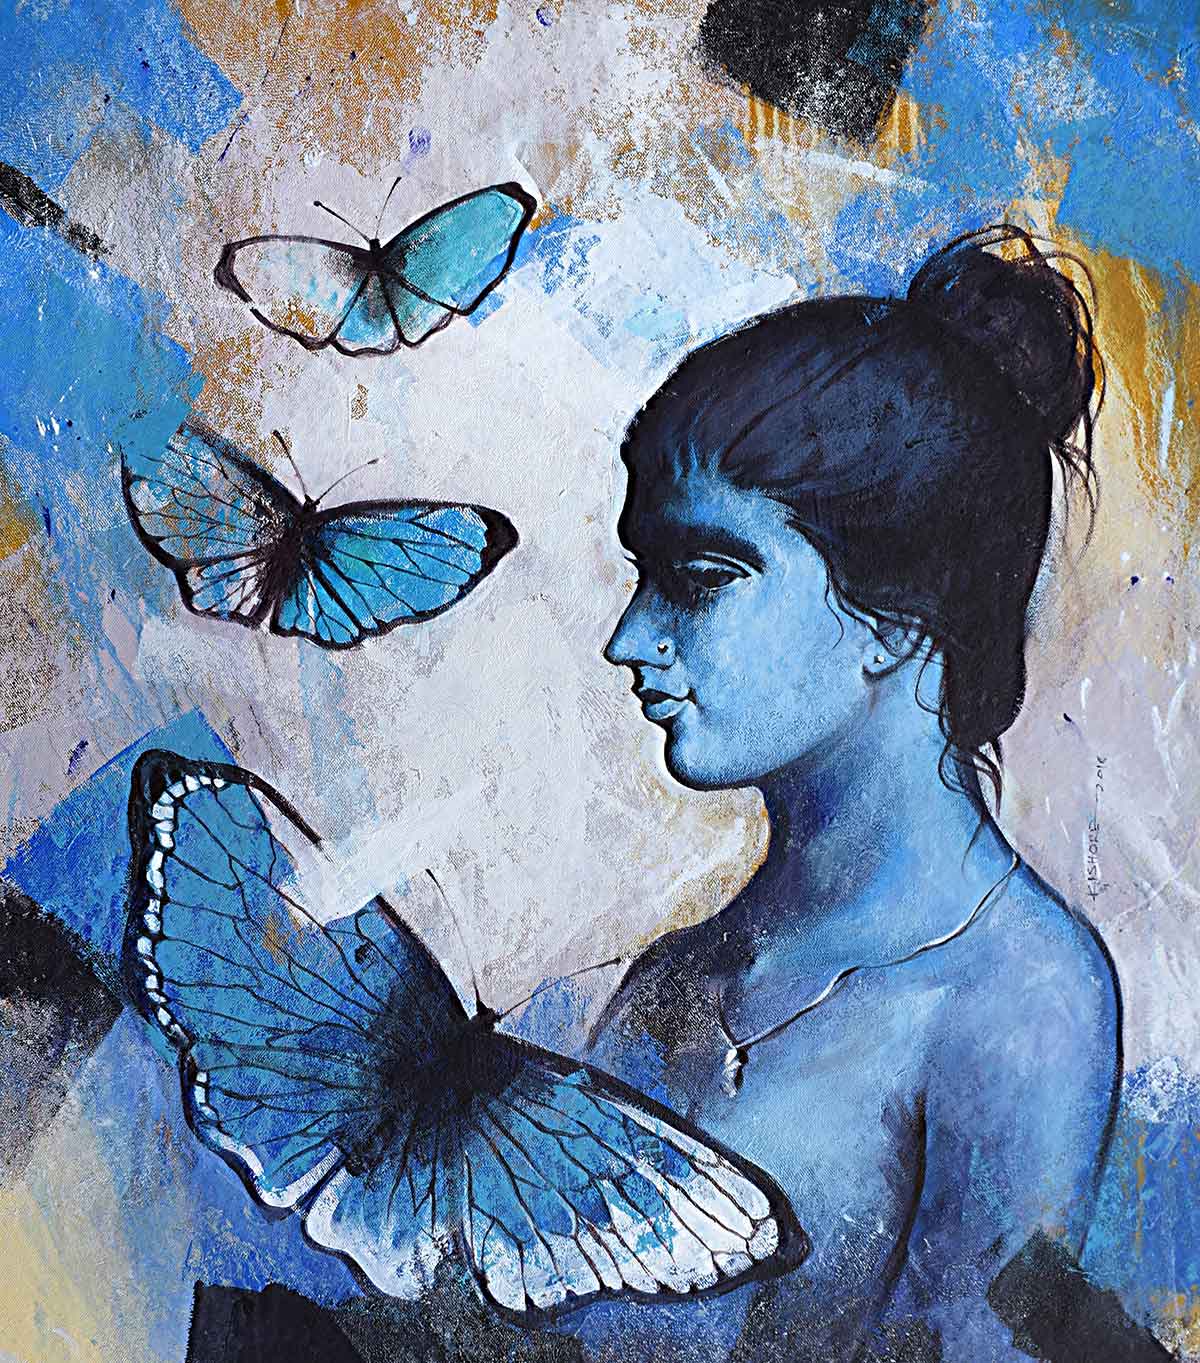 Figurative Painting with Acrylic on Canvas "Freedom of Beauty-7" art by Kishore Pratim Biswas